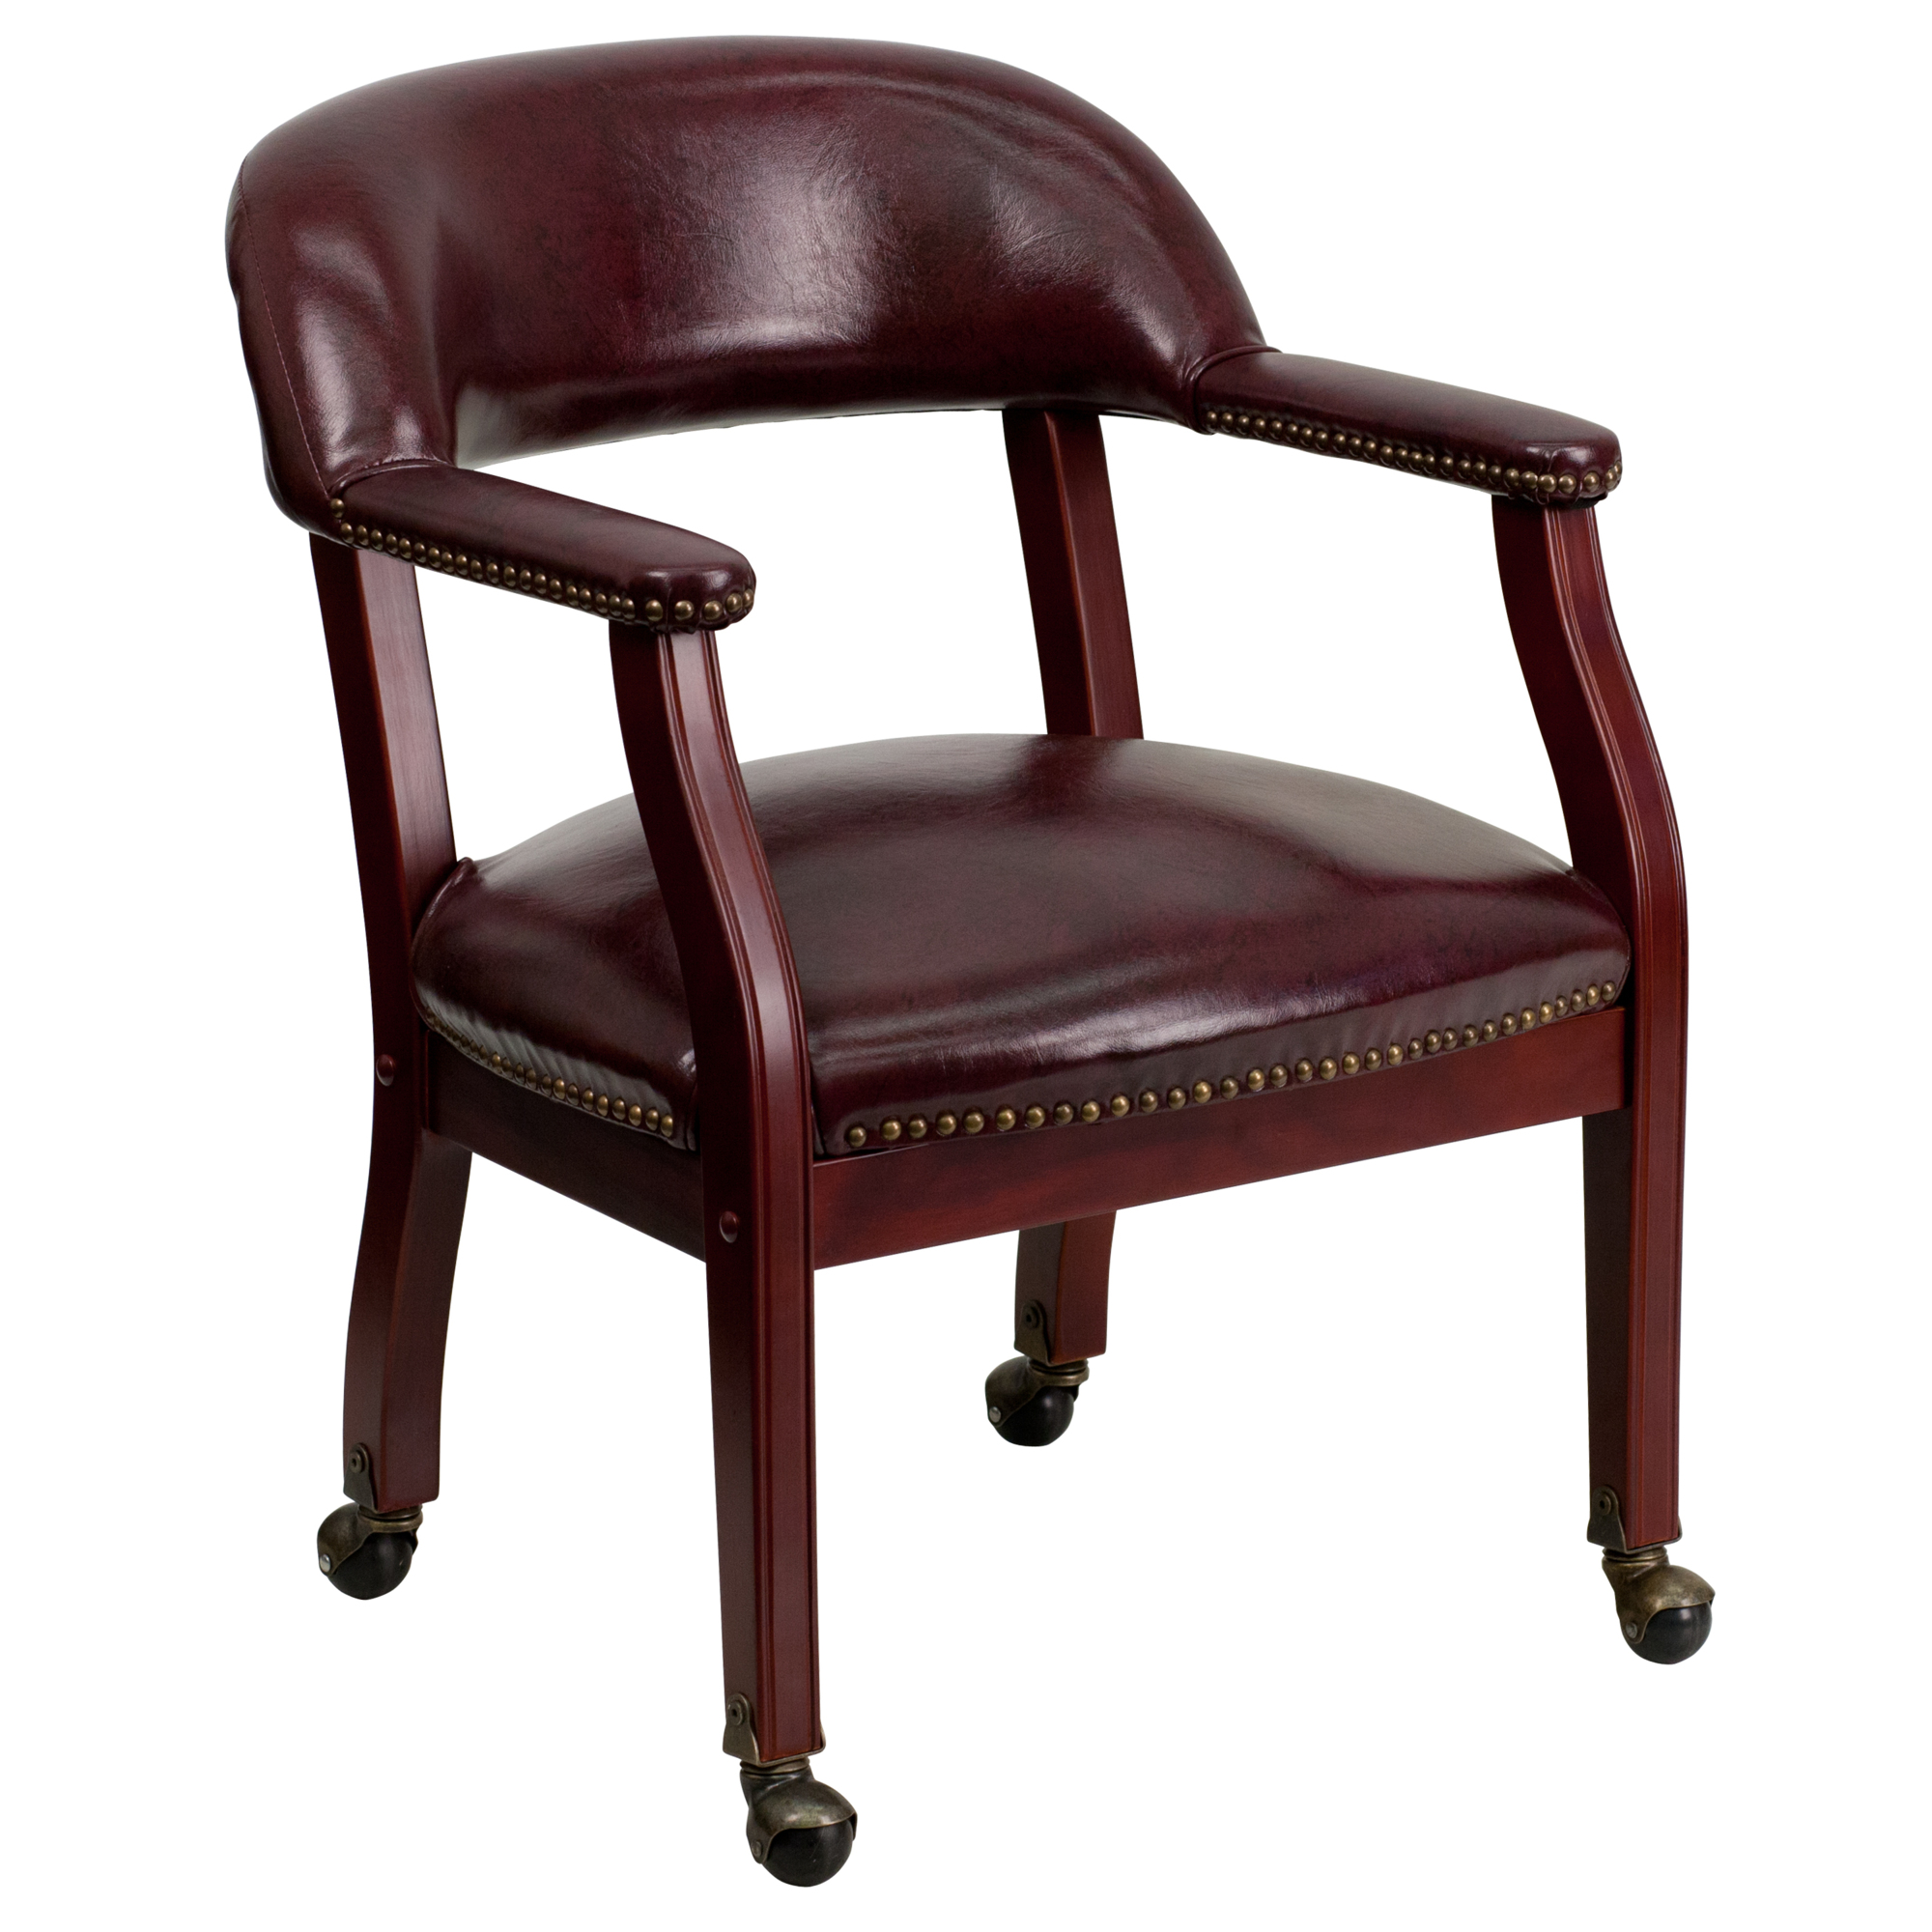 Flash Furniture, Oxblood Vinyl Conference Chair with Casters, Primary Color Burgundy, Included (qty.) 1, Model BZ100OXBLD